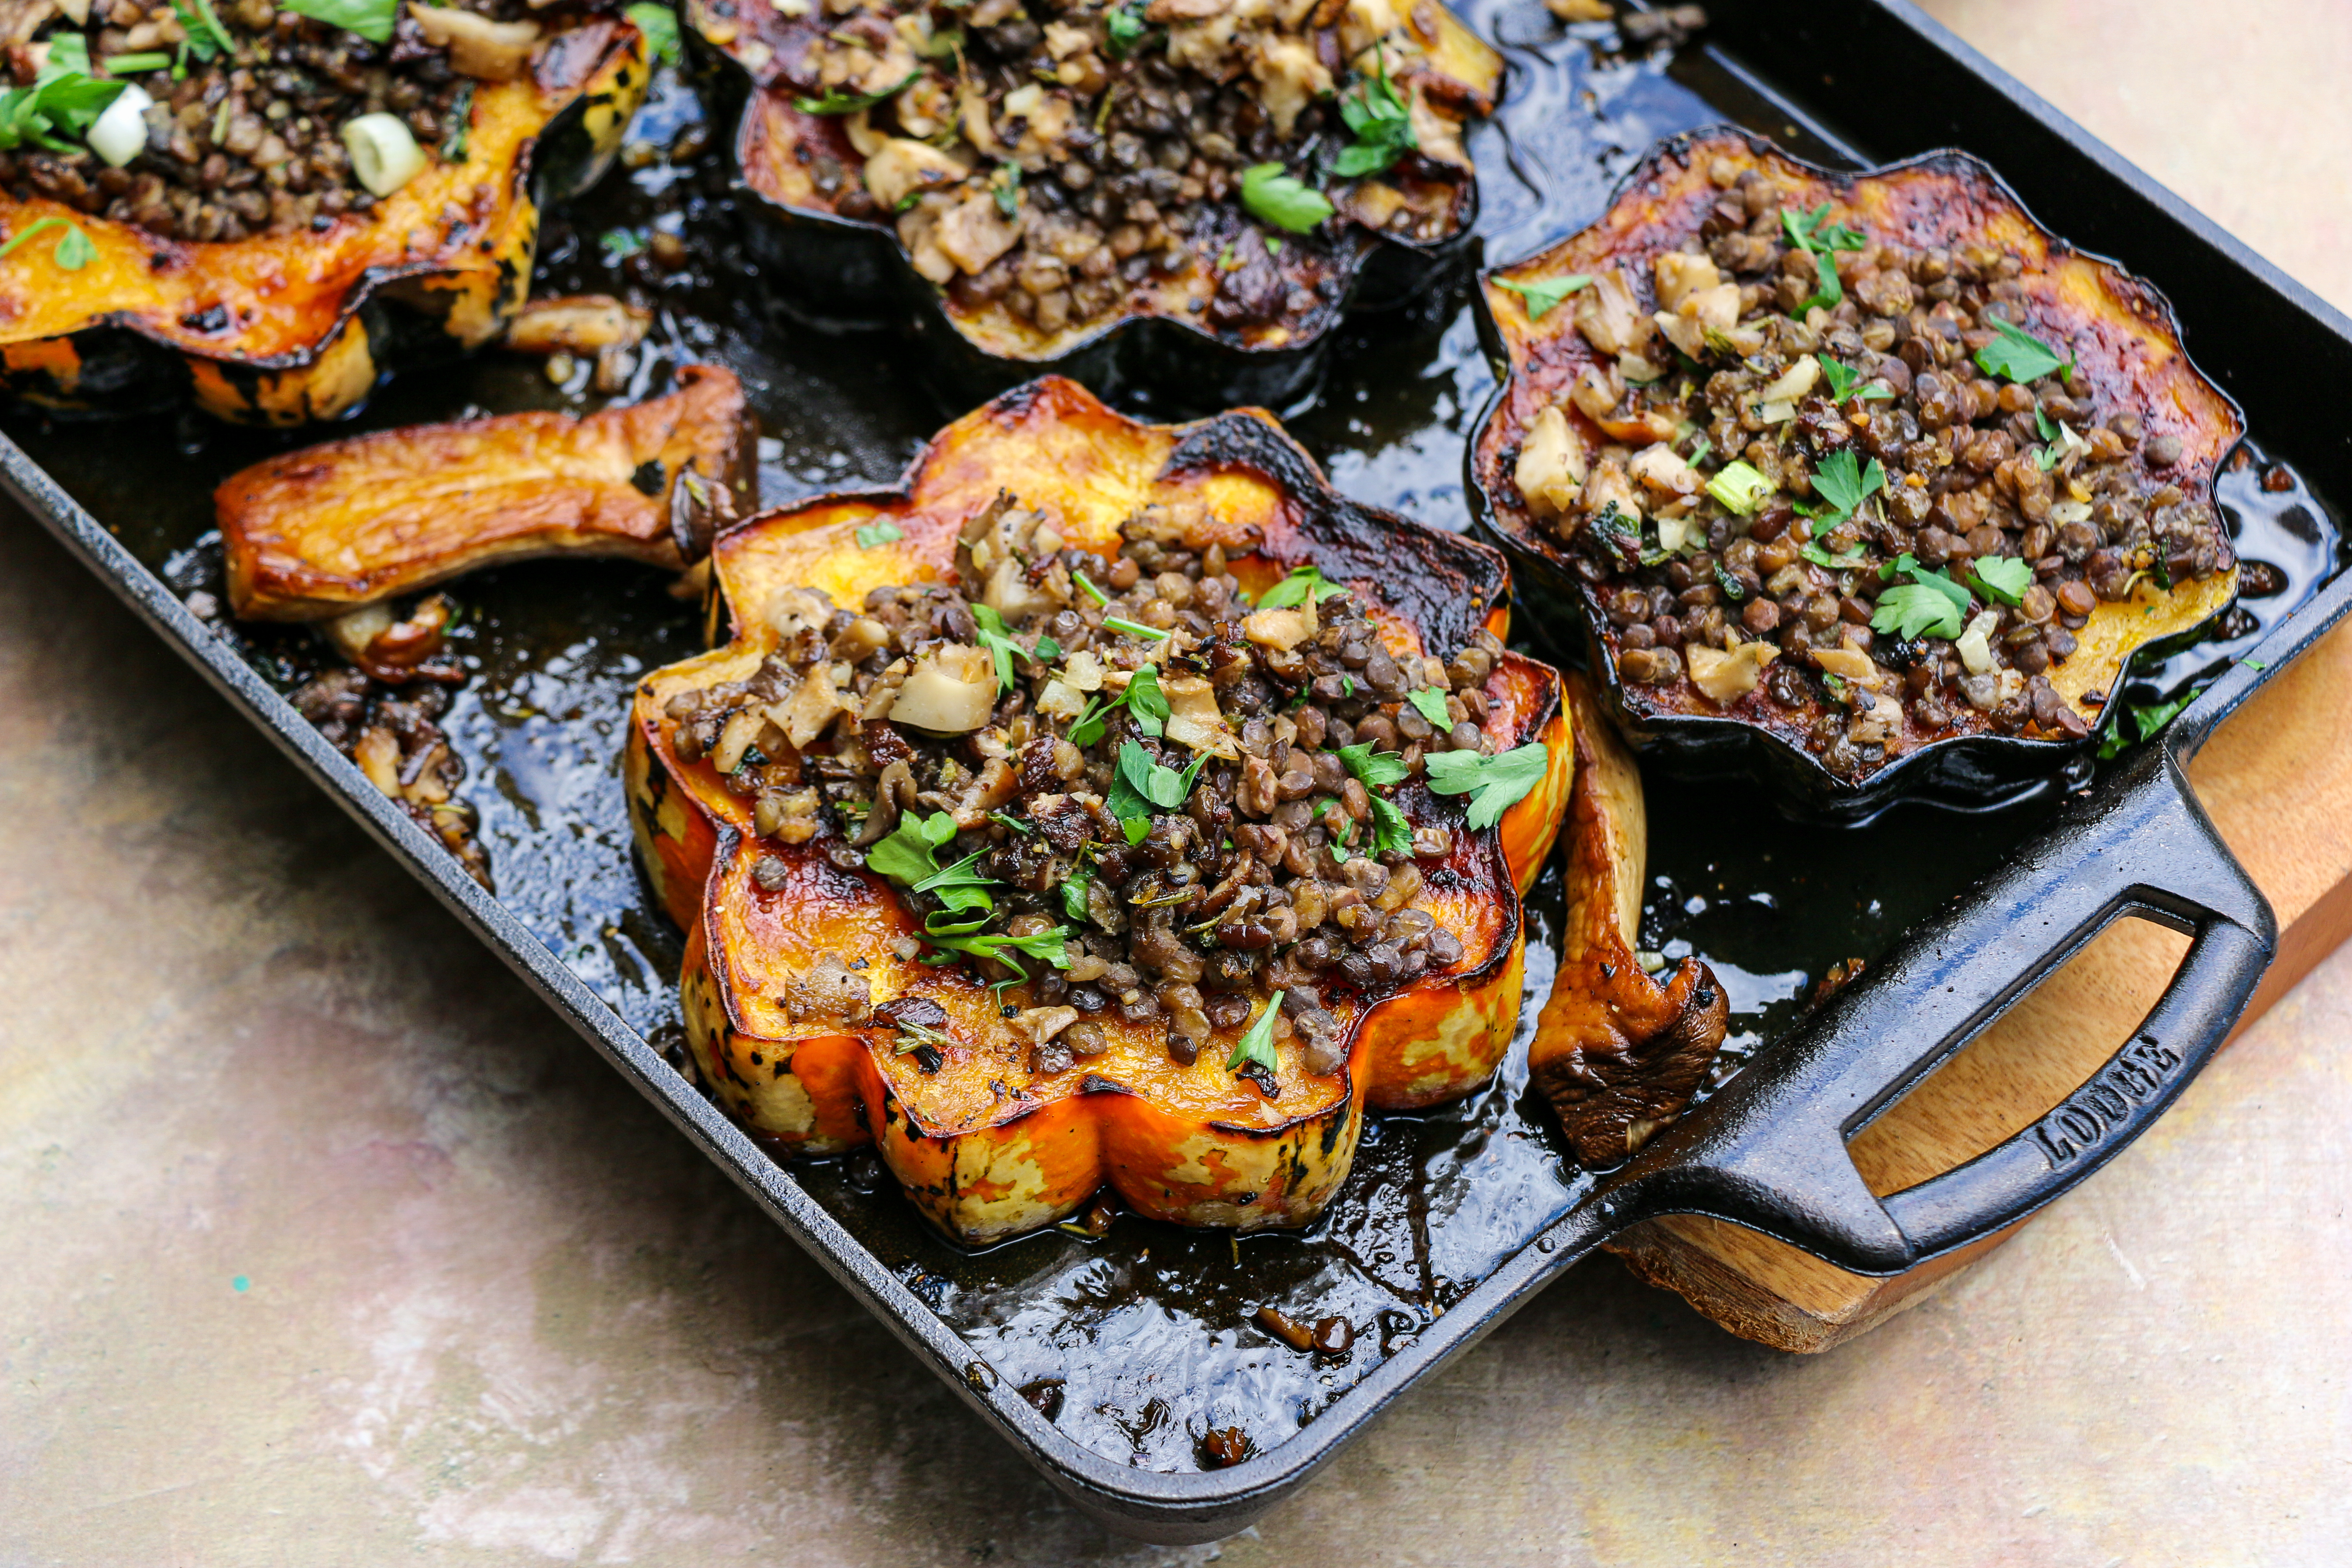 Maple smoked acorn squash filled with lentils.